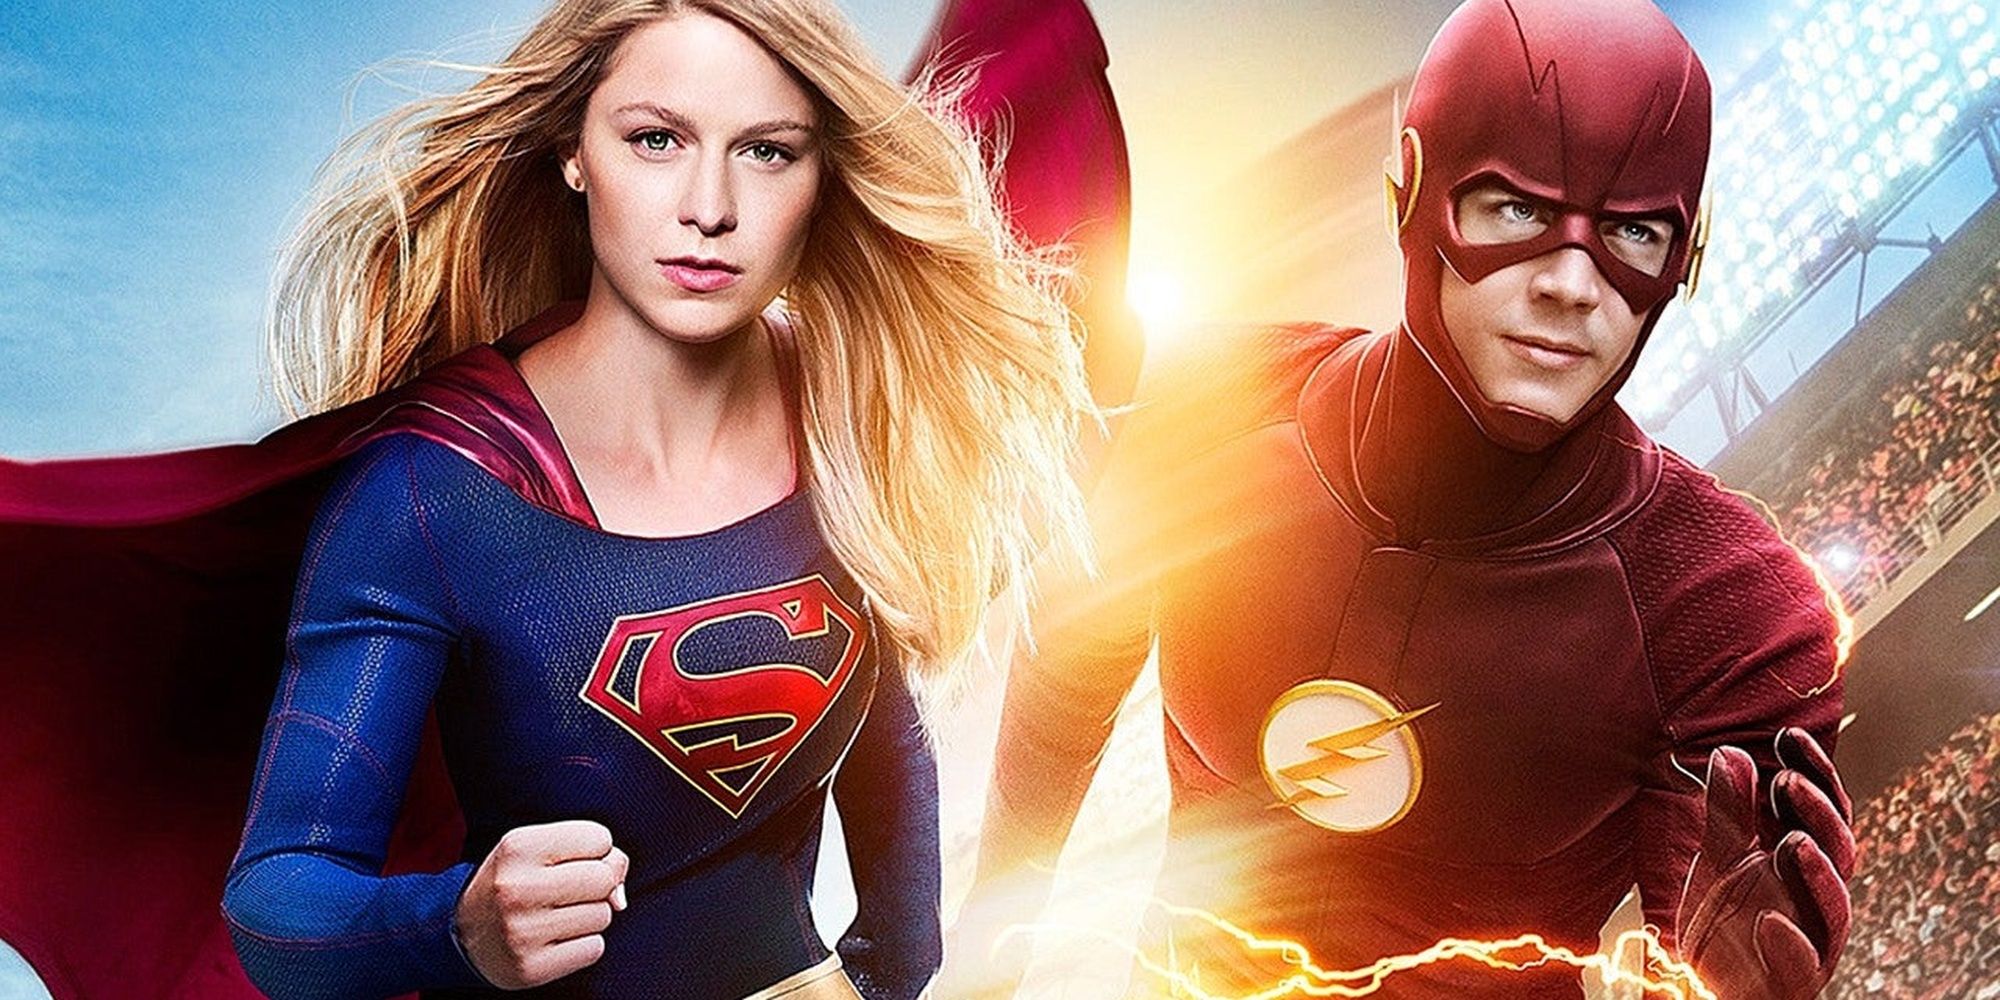 Supergirl and Flash race 